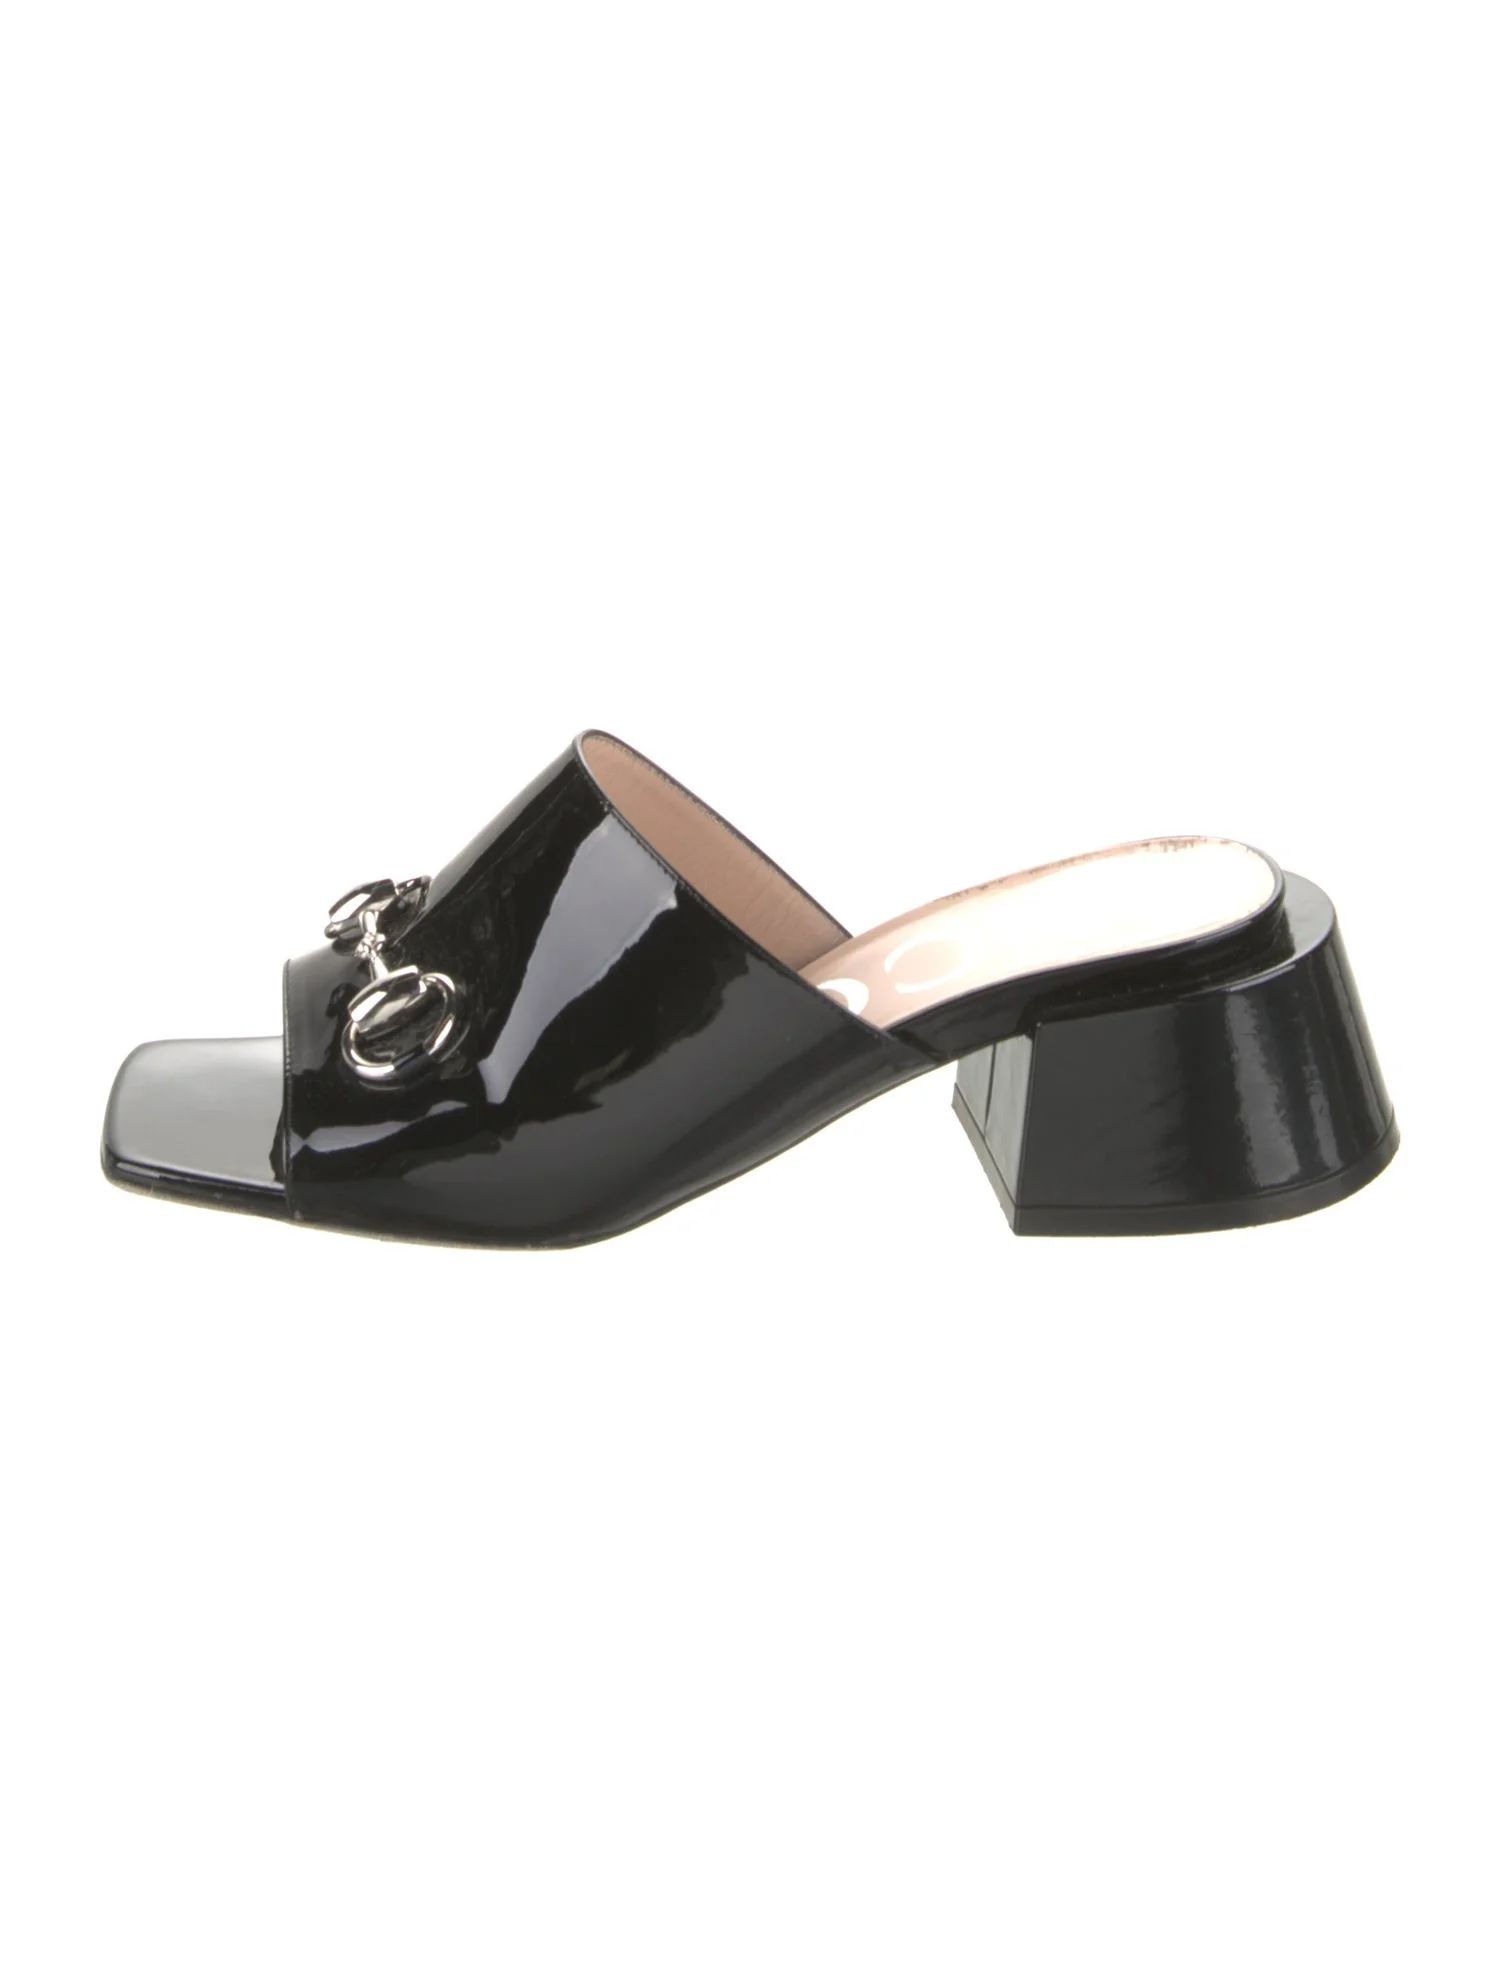 Horsebit Accent Patent Leather Slides | The RealReal